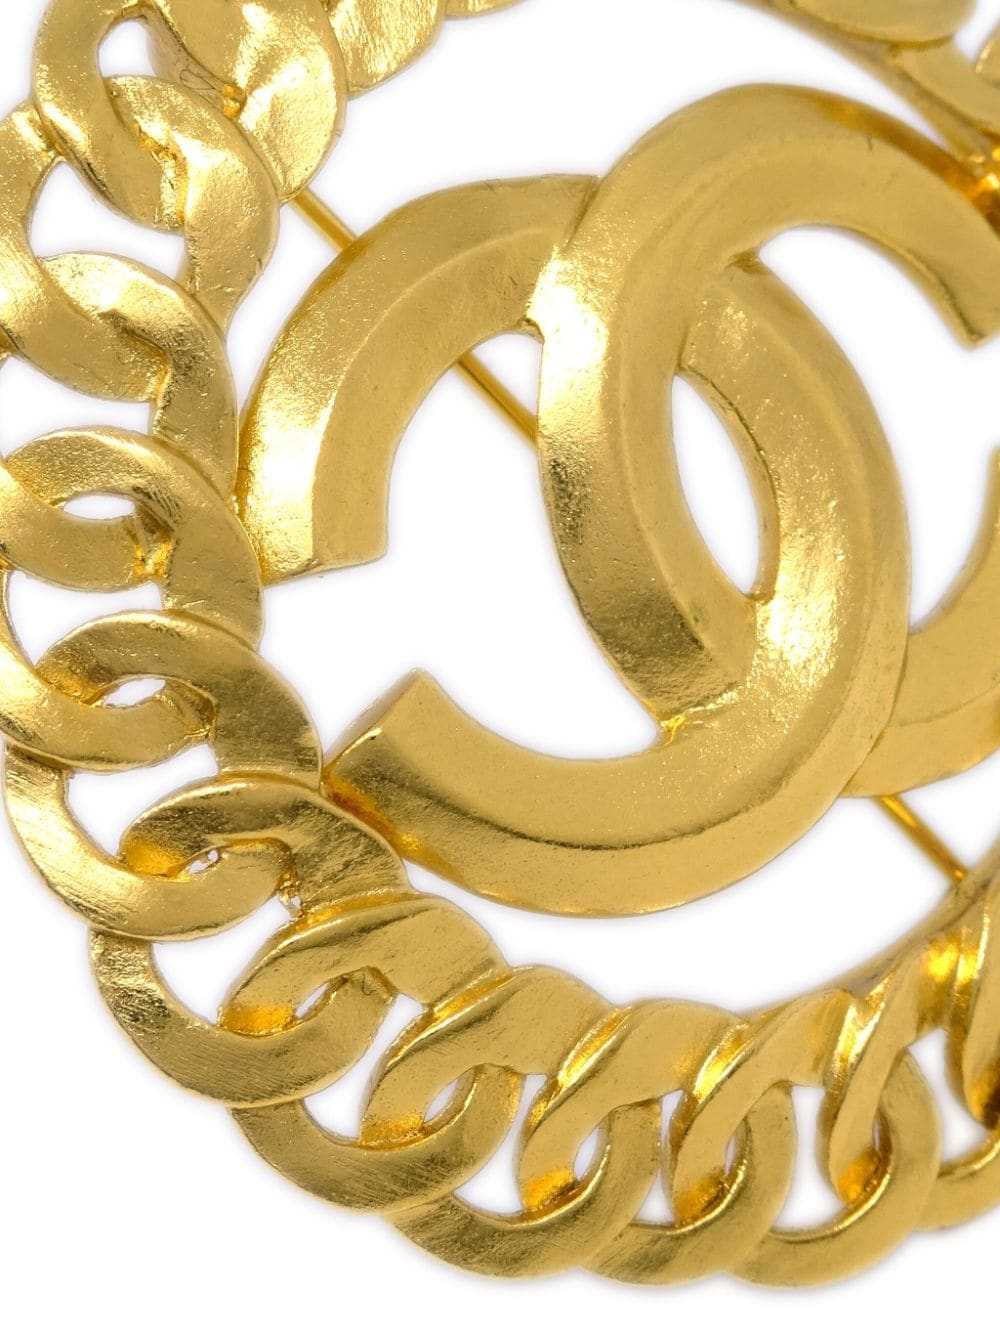 CHANEL Pre-Owned 1996 Medallion gold-plated brooch - image 2